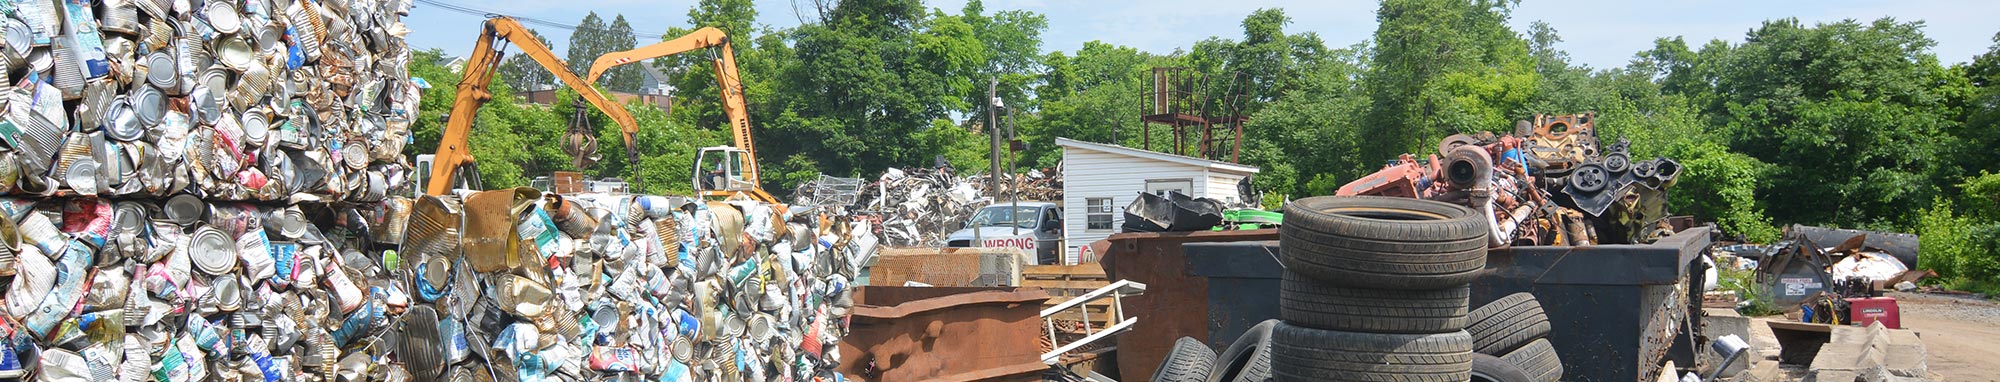 Cash for scrap metal recycling services in Fairmont, WV